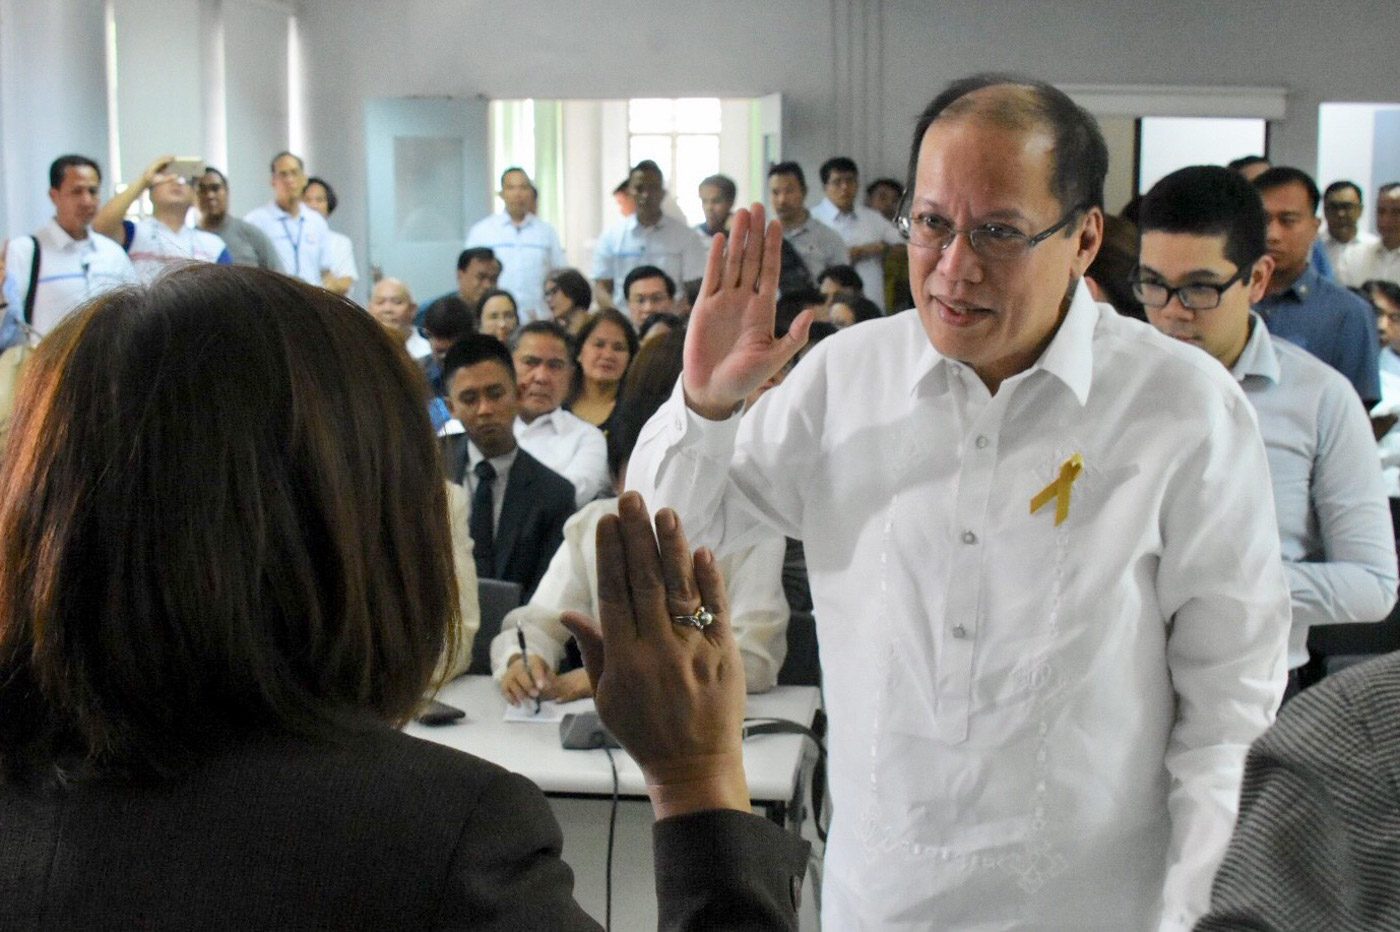 Aquino: VACC graft complaint should be dismissed outright